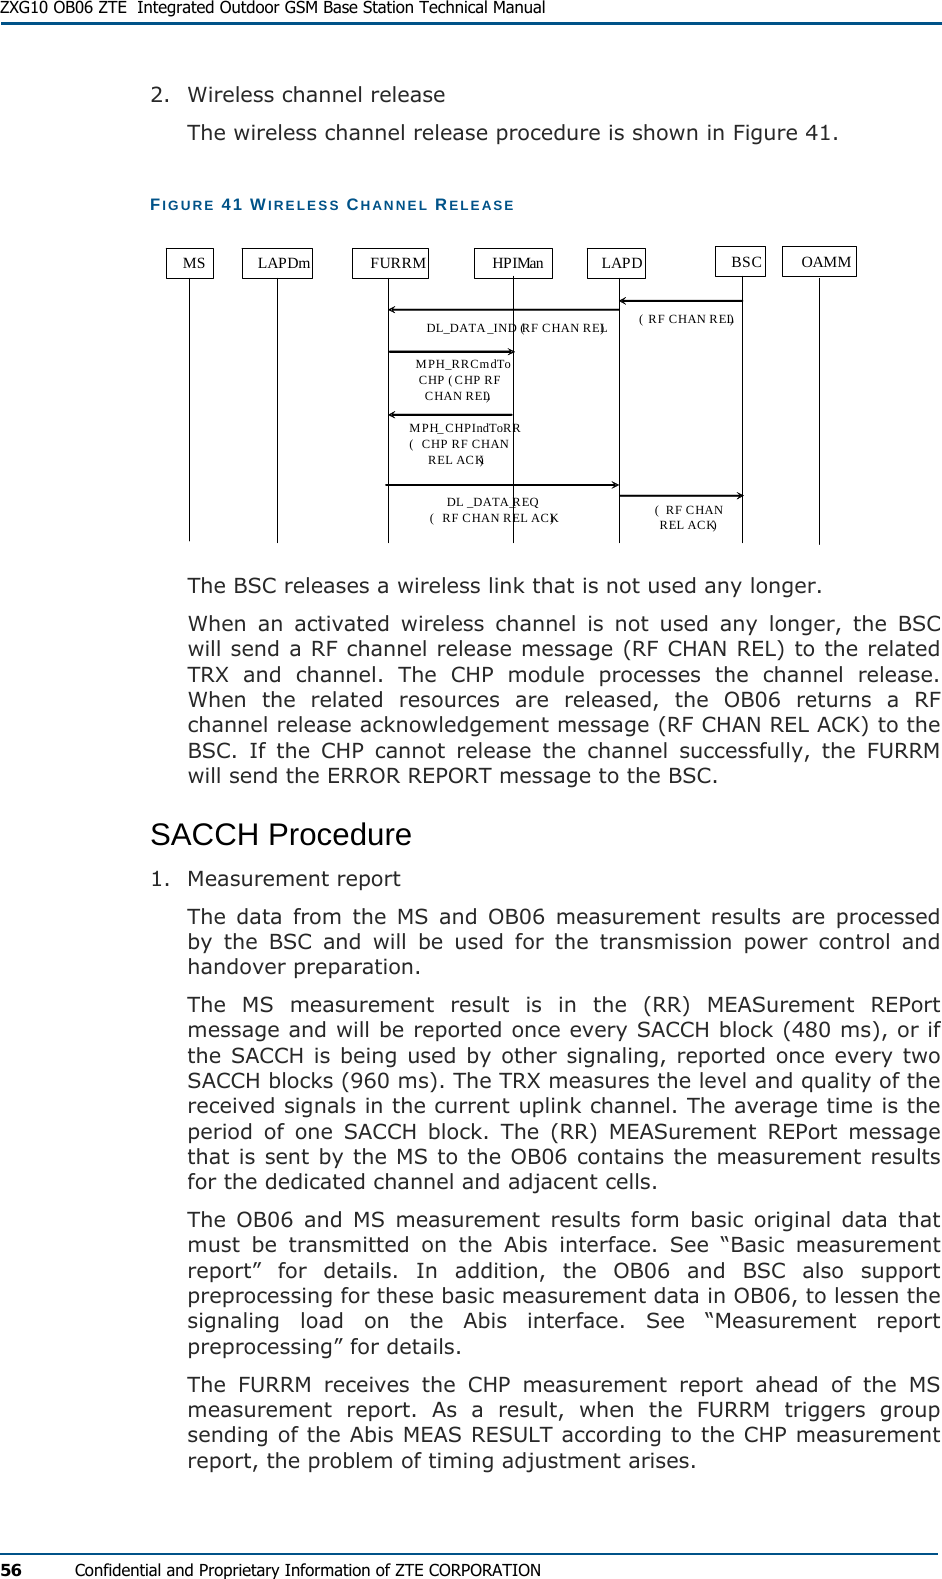  ZXG10 OB06 ZTE  Integrated Outdoor GSM Base Station Technical Manual 56  Confidential and Proprietary Information of ZTE CORPORATION 2.  Wireless channel release The wireless channel release procedure is shown in Figure 41. FIGURE 41 WIRELESS CHANNEL RELEASE MS LAPDm FURRM HPIMan LAPD BSC OAMM( RF CHAN REL) DL_DATA_IND (RF CHAN REL)MPH_RRCmdToCHP (CHP RF CHAN REL)MPH_CHPIndToRR ( CHP RF CHAN REL ACK)DL _DATA_REQ( RF CHAN REL ACK)( RF CHAN REL ACK)  The BSC releases a wireless link that is not used any longer. When an activated wireless channel is not used any longer, the BSC will send a RF channel release message (RF CHAN REL) to the related TRX and channel. The CHP module processes the channel release. When the related resources are released, the OB06 returns a RF channel release acknowledgement message (RF CHAN REL ACK) to the BSC. If the CHP cannot release the channel successfully, the FURRM will send the ERROR REPORT message to the BSC. SACCH Procedure 1. Measurement report The data from the MS and OB06 measurement results are processed by the BSC and will be used for the transmission power control and handover preparation. The MS measurement result is in the (RR) MEASurement REPort message and will be reported once every SACCH block (480 ms), or if the SACCH is being used by other signaling, reported once every two SACCH blocks (960 ms). The TRX measures the level and quality of the received signals in the current uplink channel. The average time is the period of one SACCH block. The (RR) MEASurement REPort message that is sent by the MS to the OB06 contains the measurement results for the dedicated channel and adjacent cells. The OB06 and MS measurement results form basic original data that must be transmitted on the Abis interface. See “Basic measurement report” for details. In addition, the OB06 and BSC also support preprocessing for these basic measurement data in OB06, to lessen the signaling load on the Abis interface. See “Measurement report preprocessing” for details. The FURRM receives the CHP measurement report ahead of the MS measurement report. As a result, when the FURRM triggers group sending of the Abis MEAS RESULT according to the CHP measurement report, the problem of timing adjustment arises. 